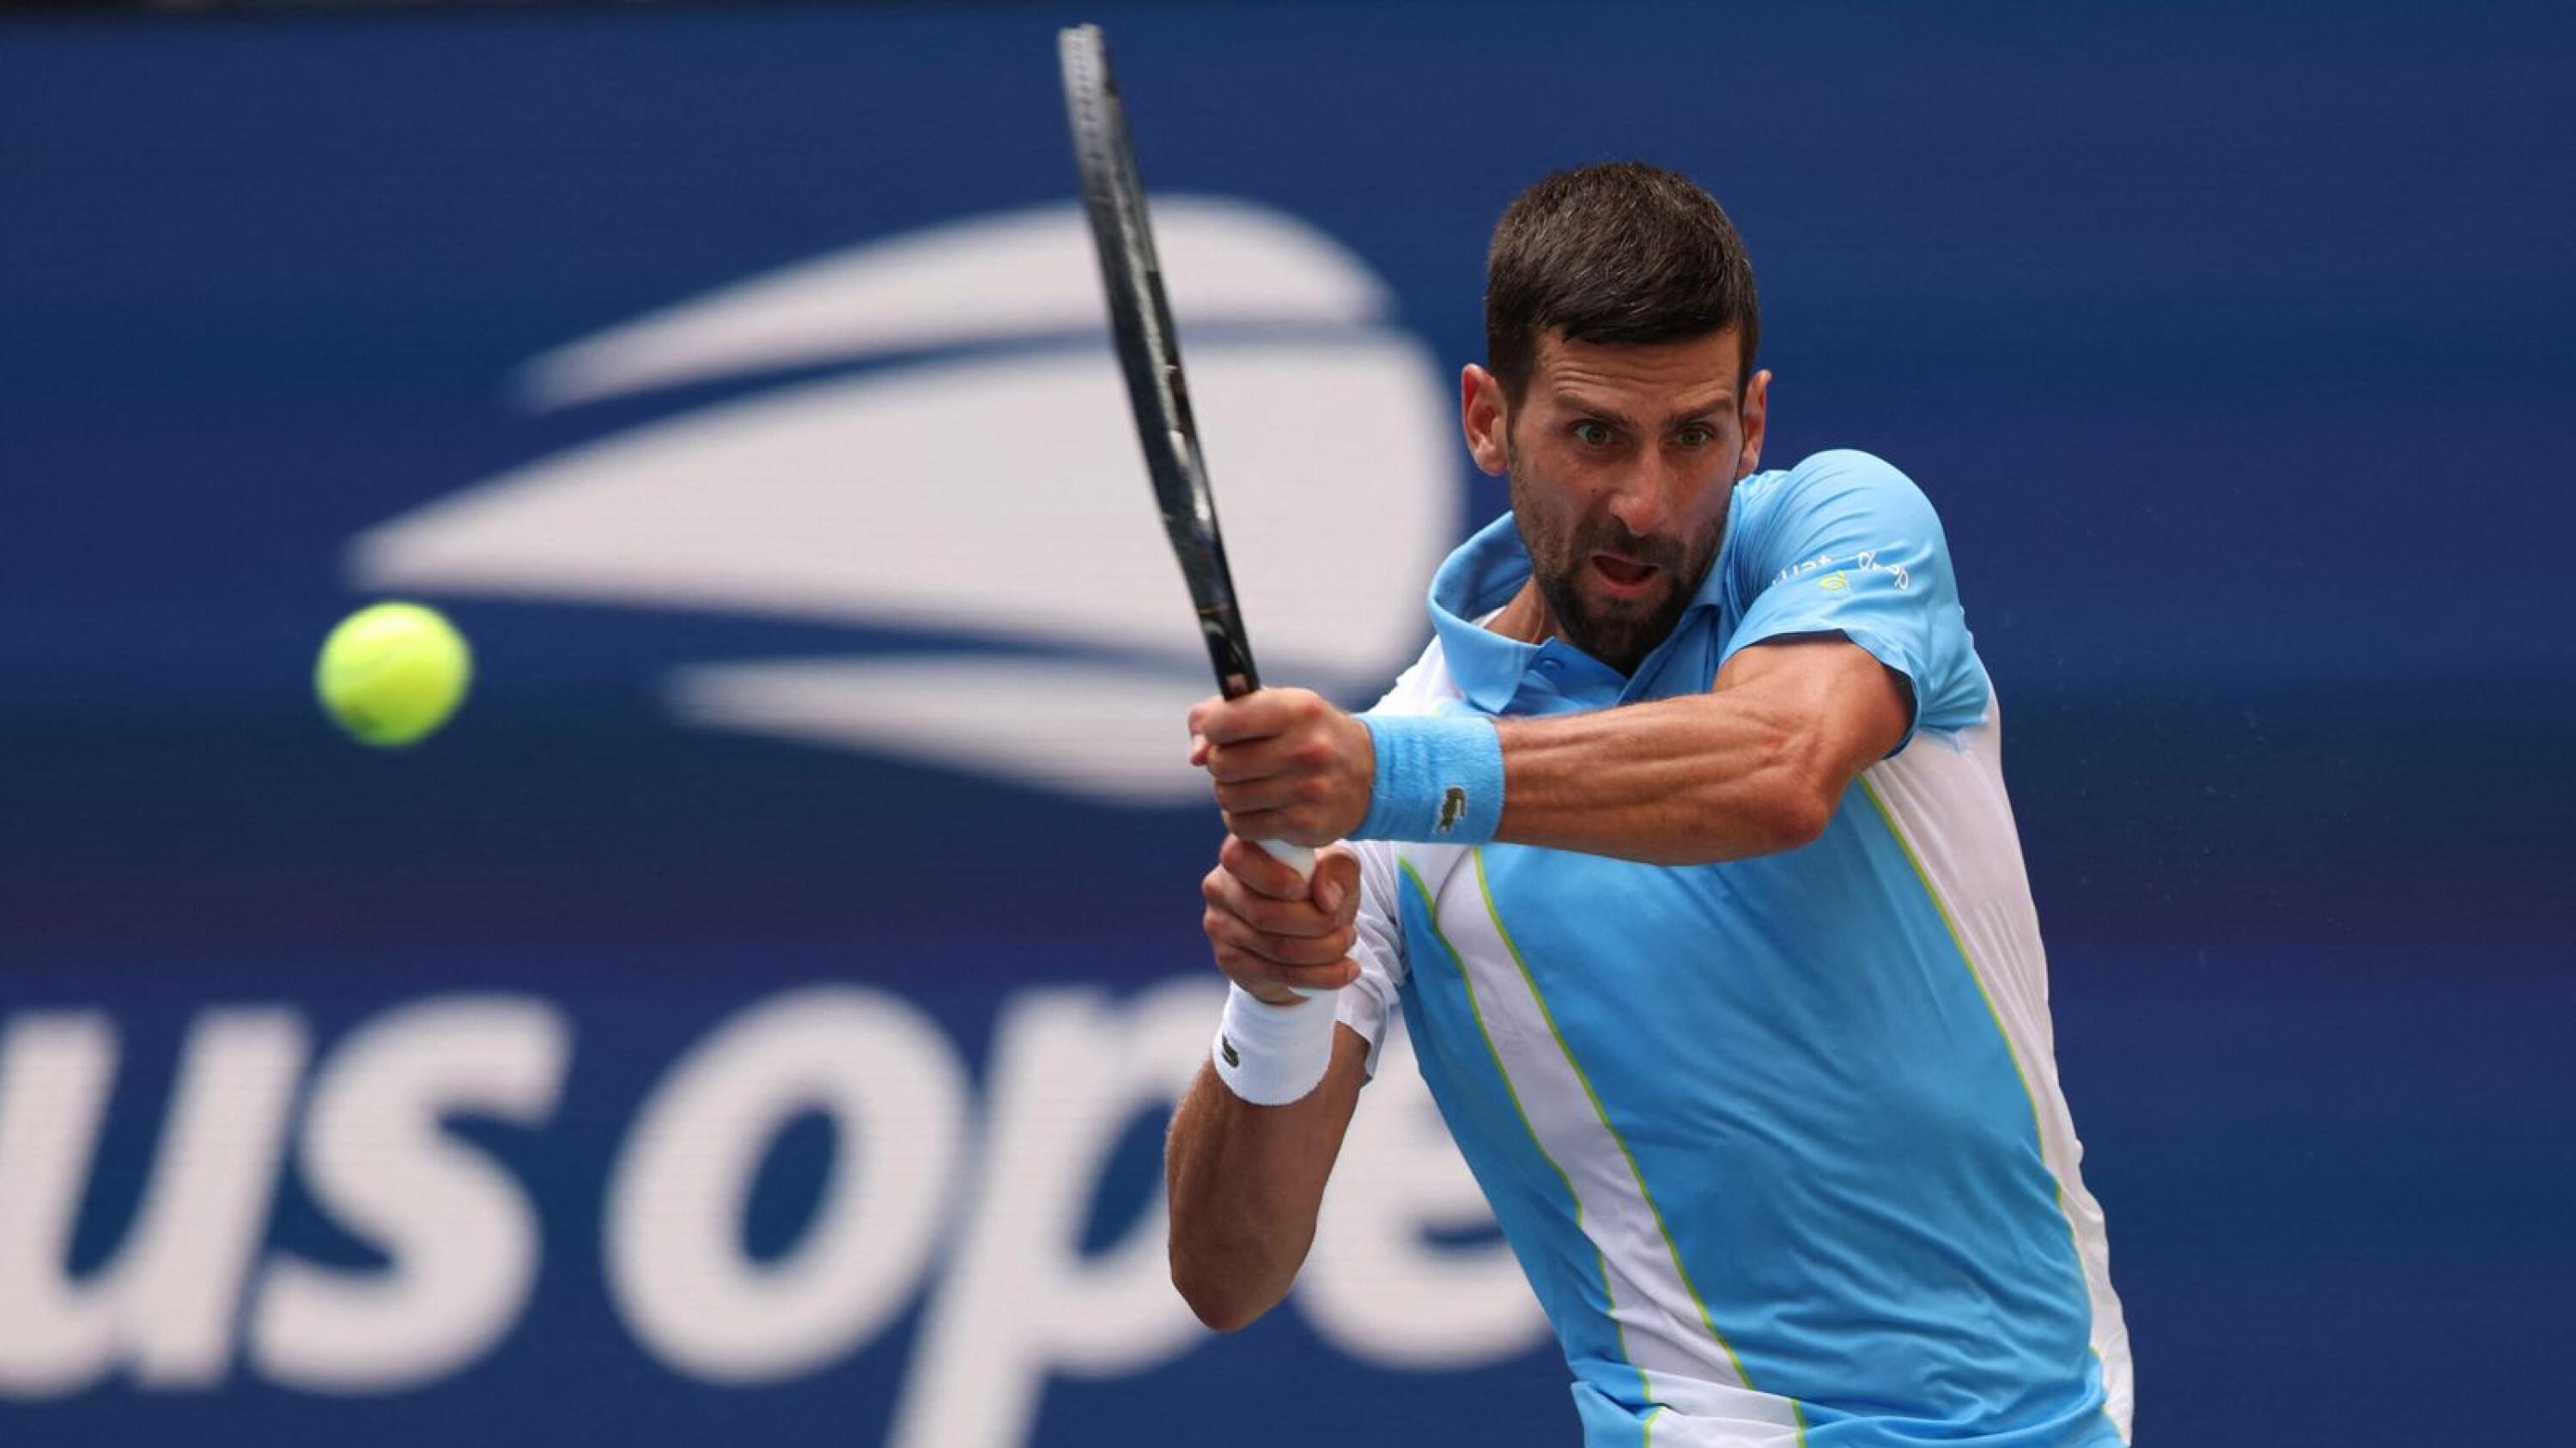 Novak Djokovic in action during his US Open second round match against Spain's Bernabe Zapata Miralles.